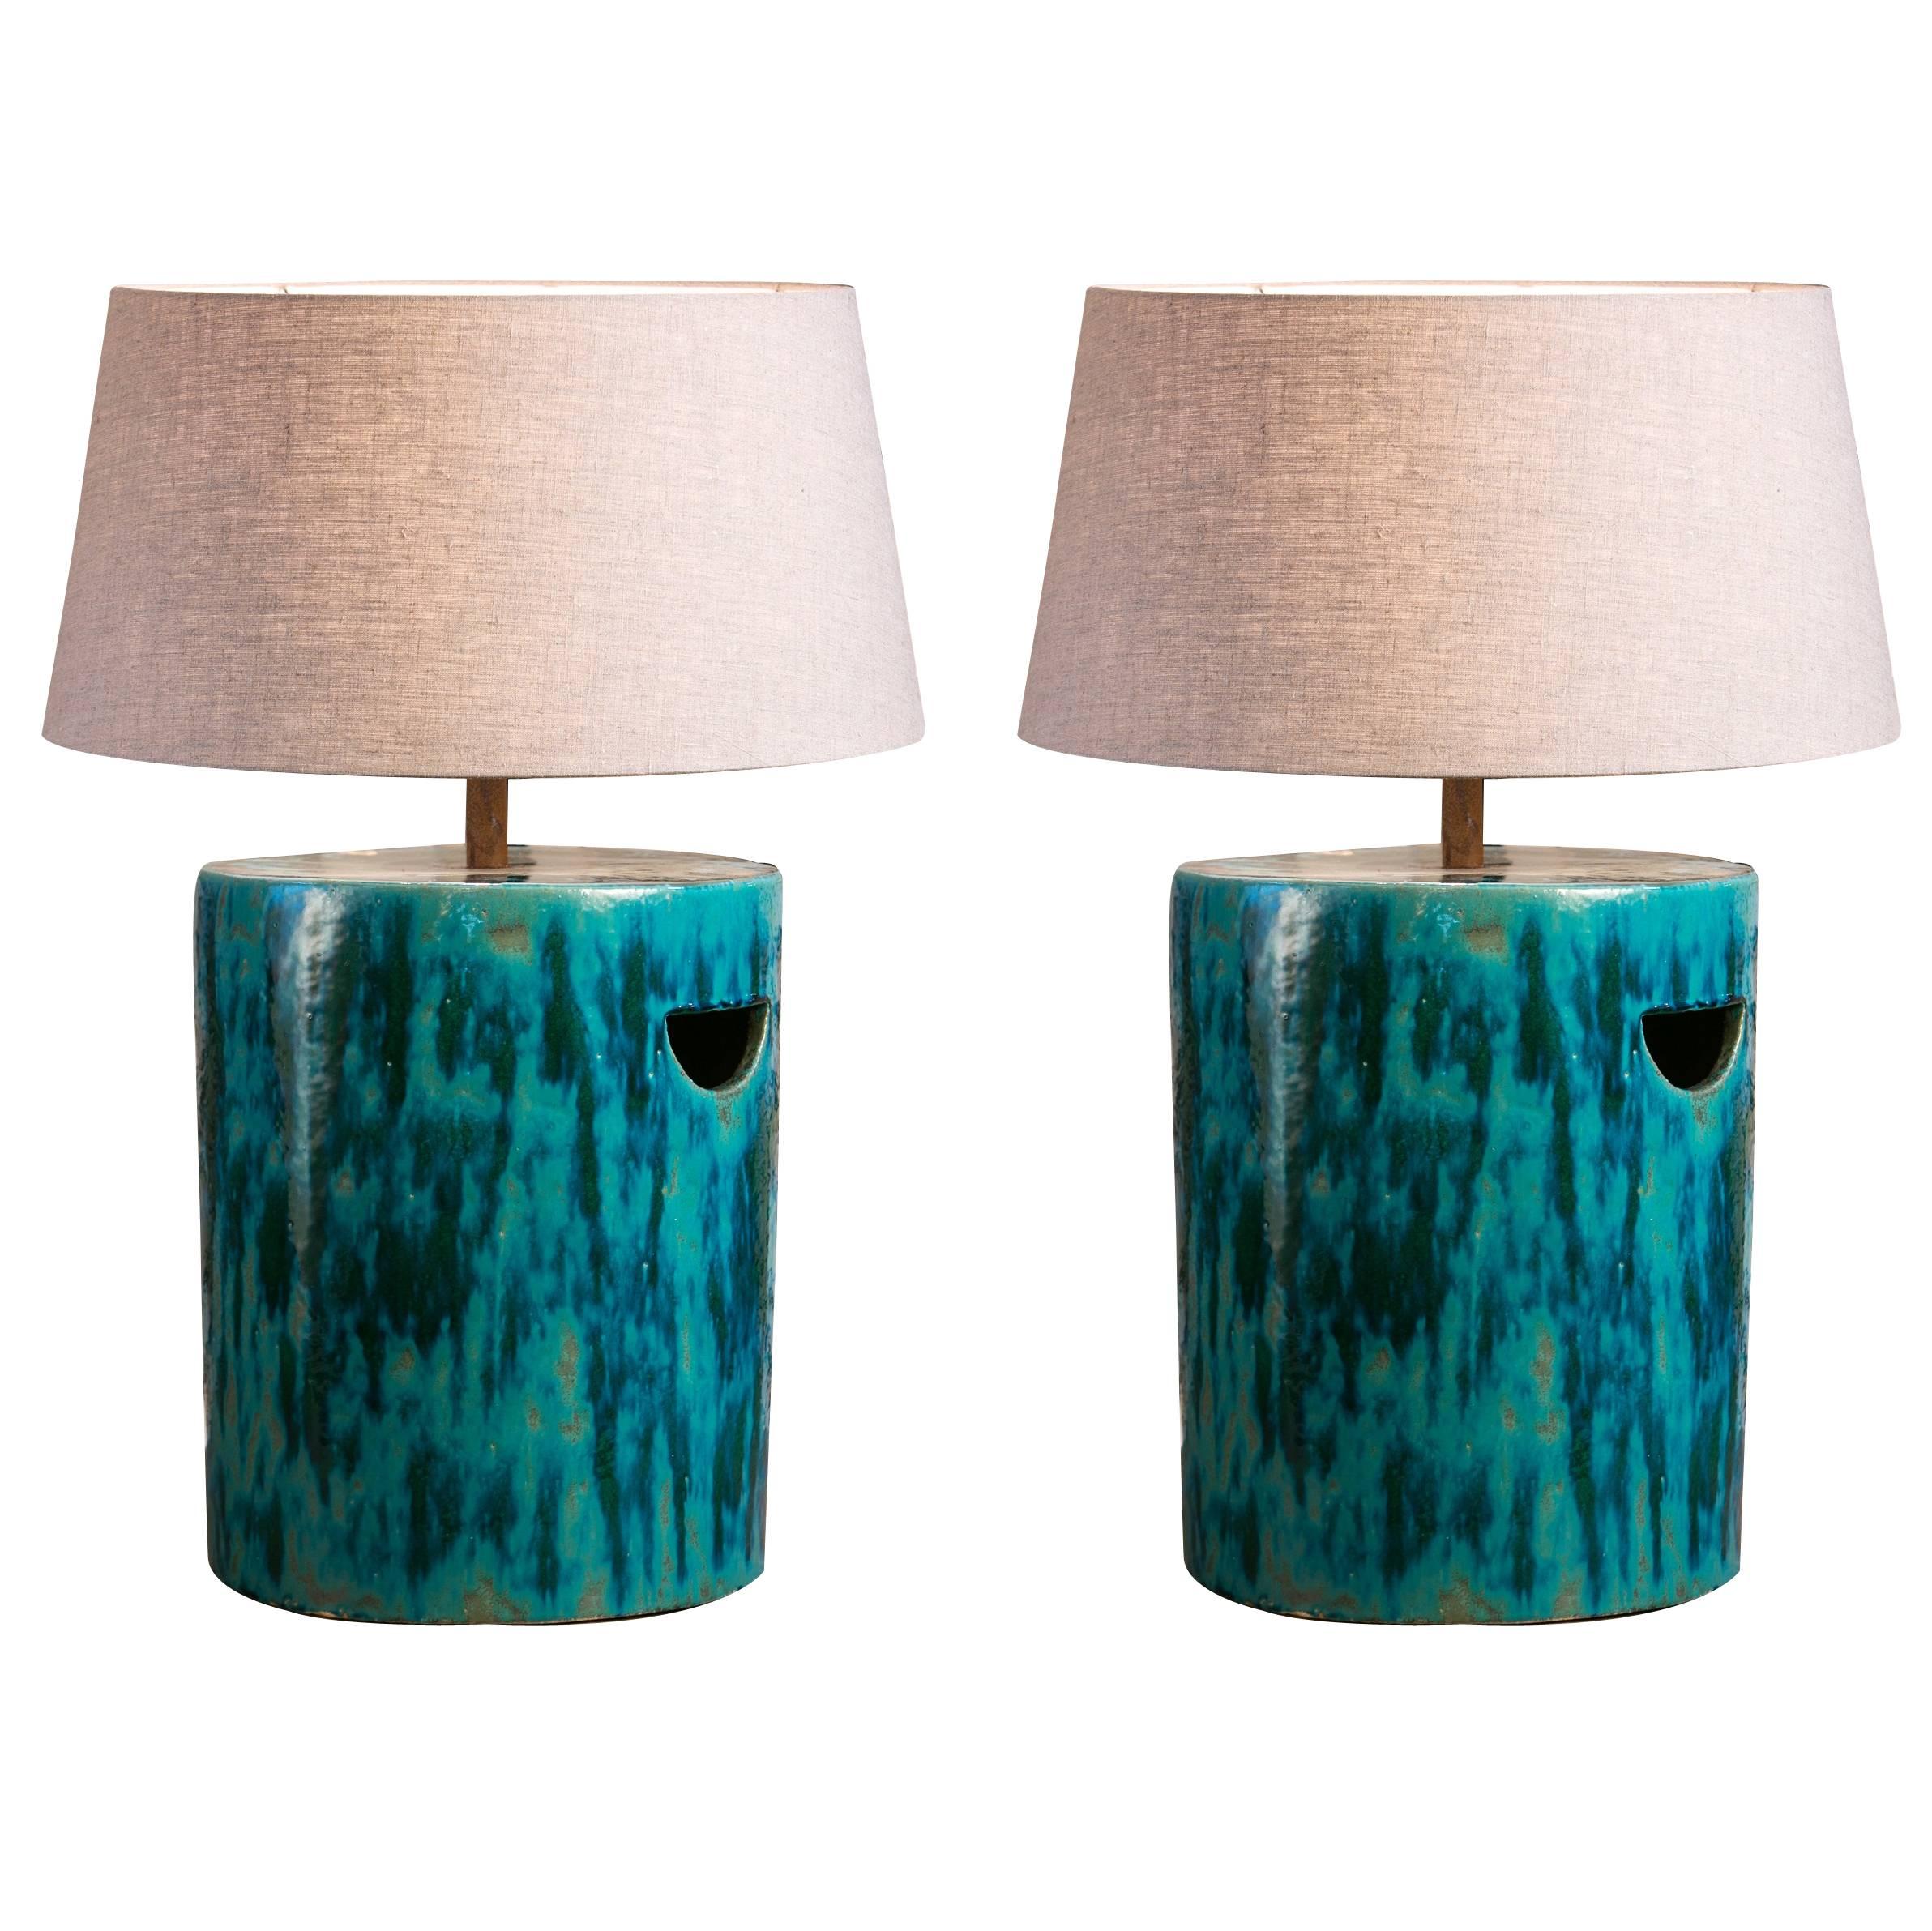 Pair of Large Glazed Ceramic Lamps with Belgian Linen Shades